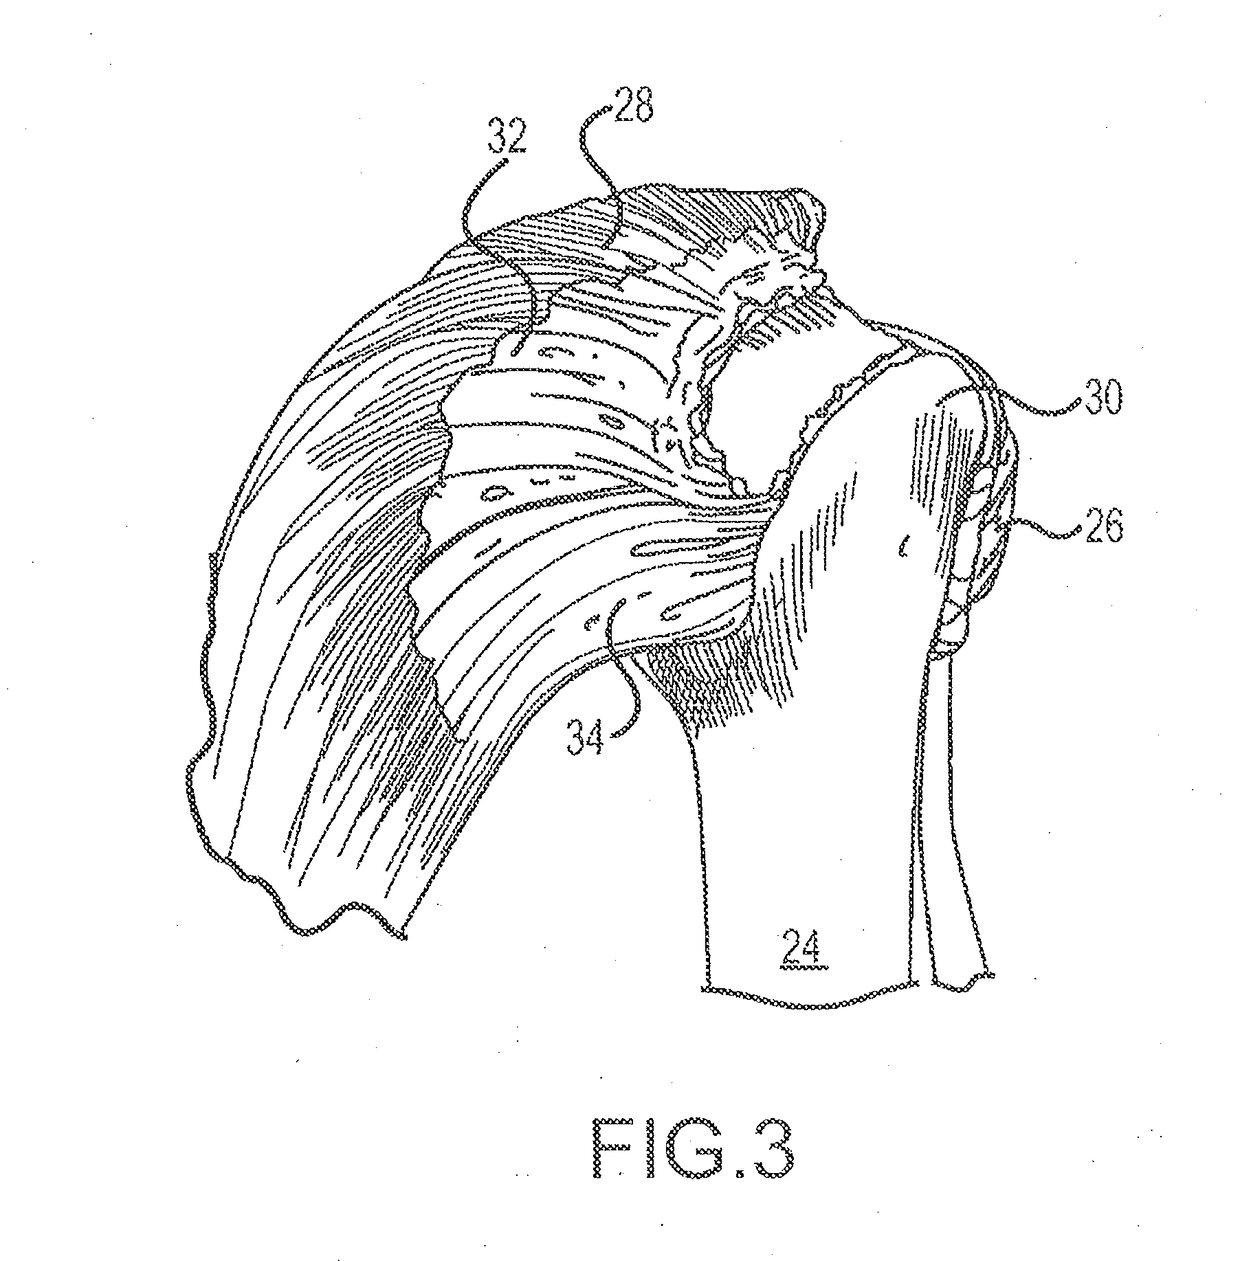 Suture sleeve patch and methods of delivery within an existing arthroscopic workflow